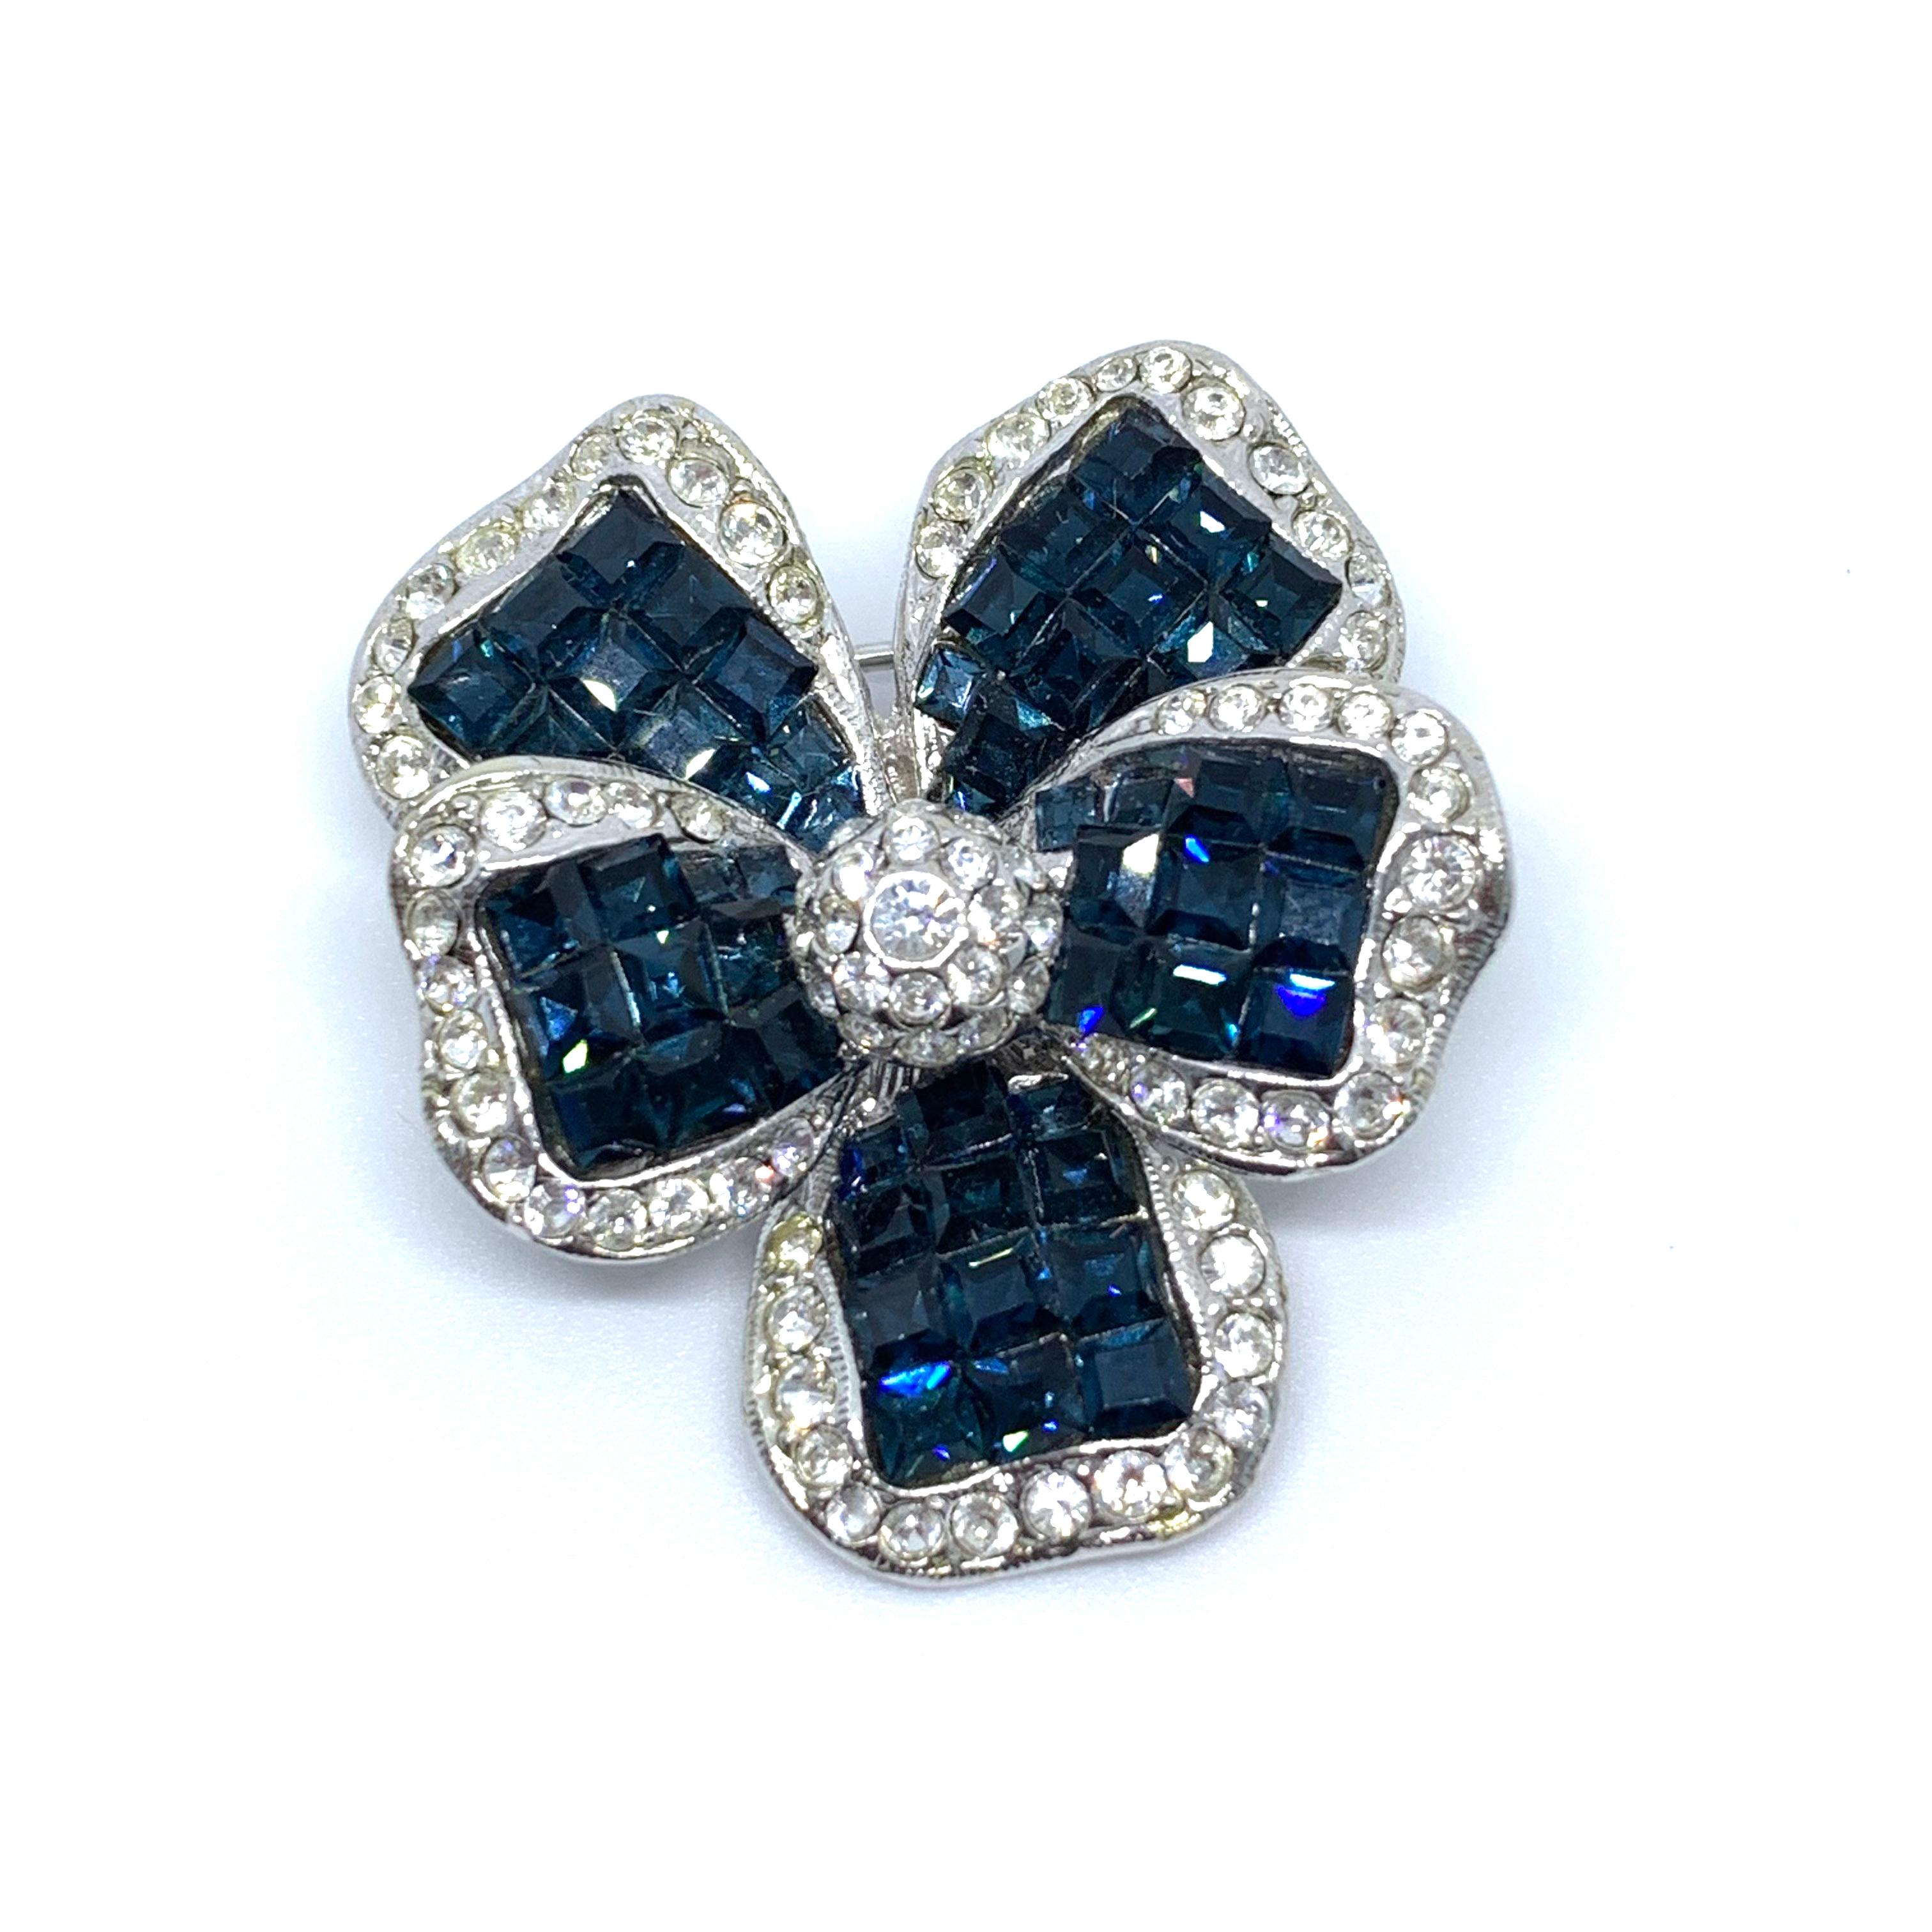 Classic Elegant Vintage Sapphire Swarovski Crystal Flower Brooch

This vintage brooch features over 150 pieces of square cut sapphire and round white Swarovski crystals in white gold tone. Made in the USA by New York designer brand Jarin.  1-1/2